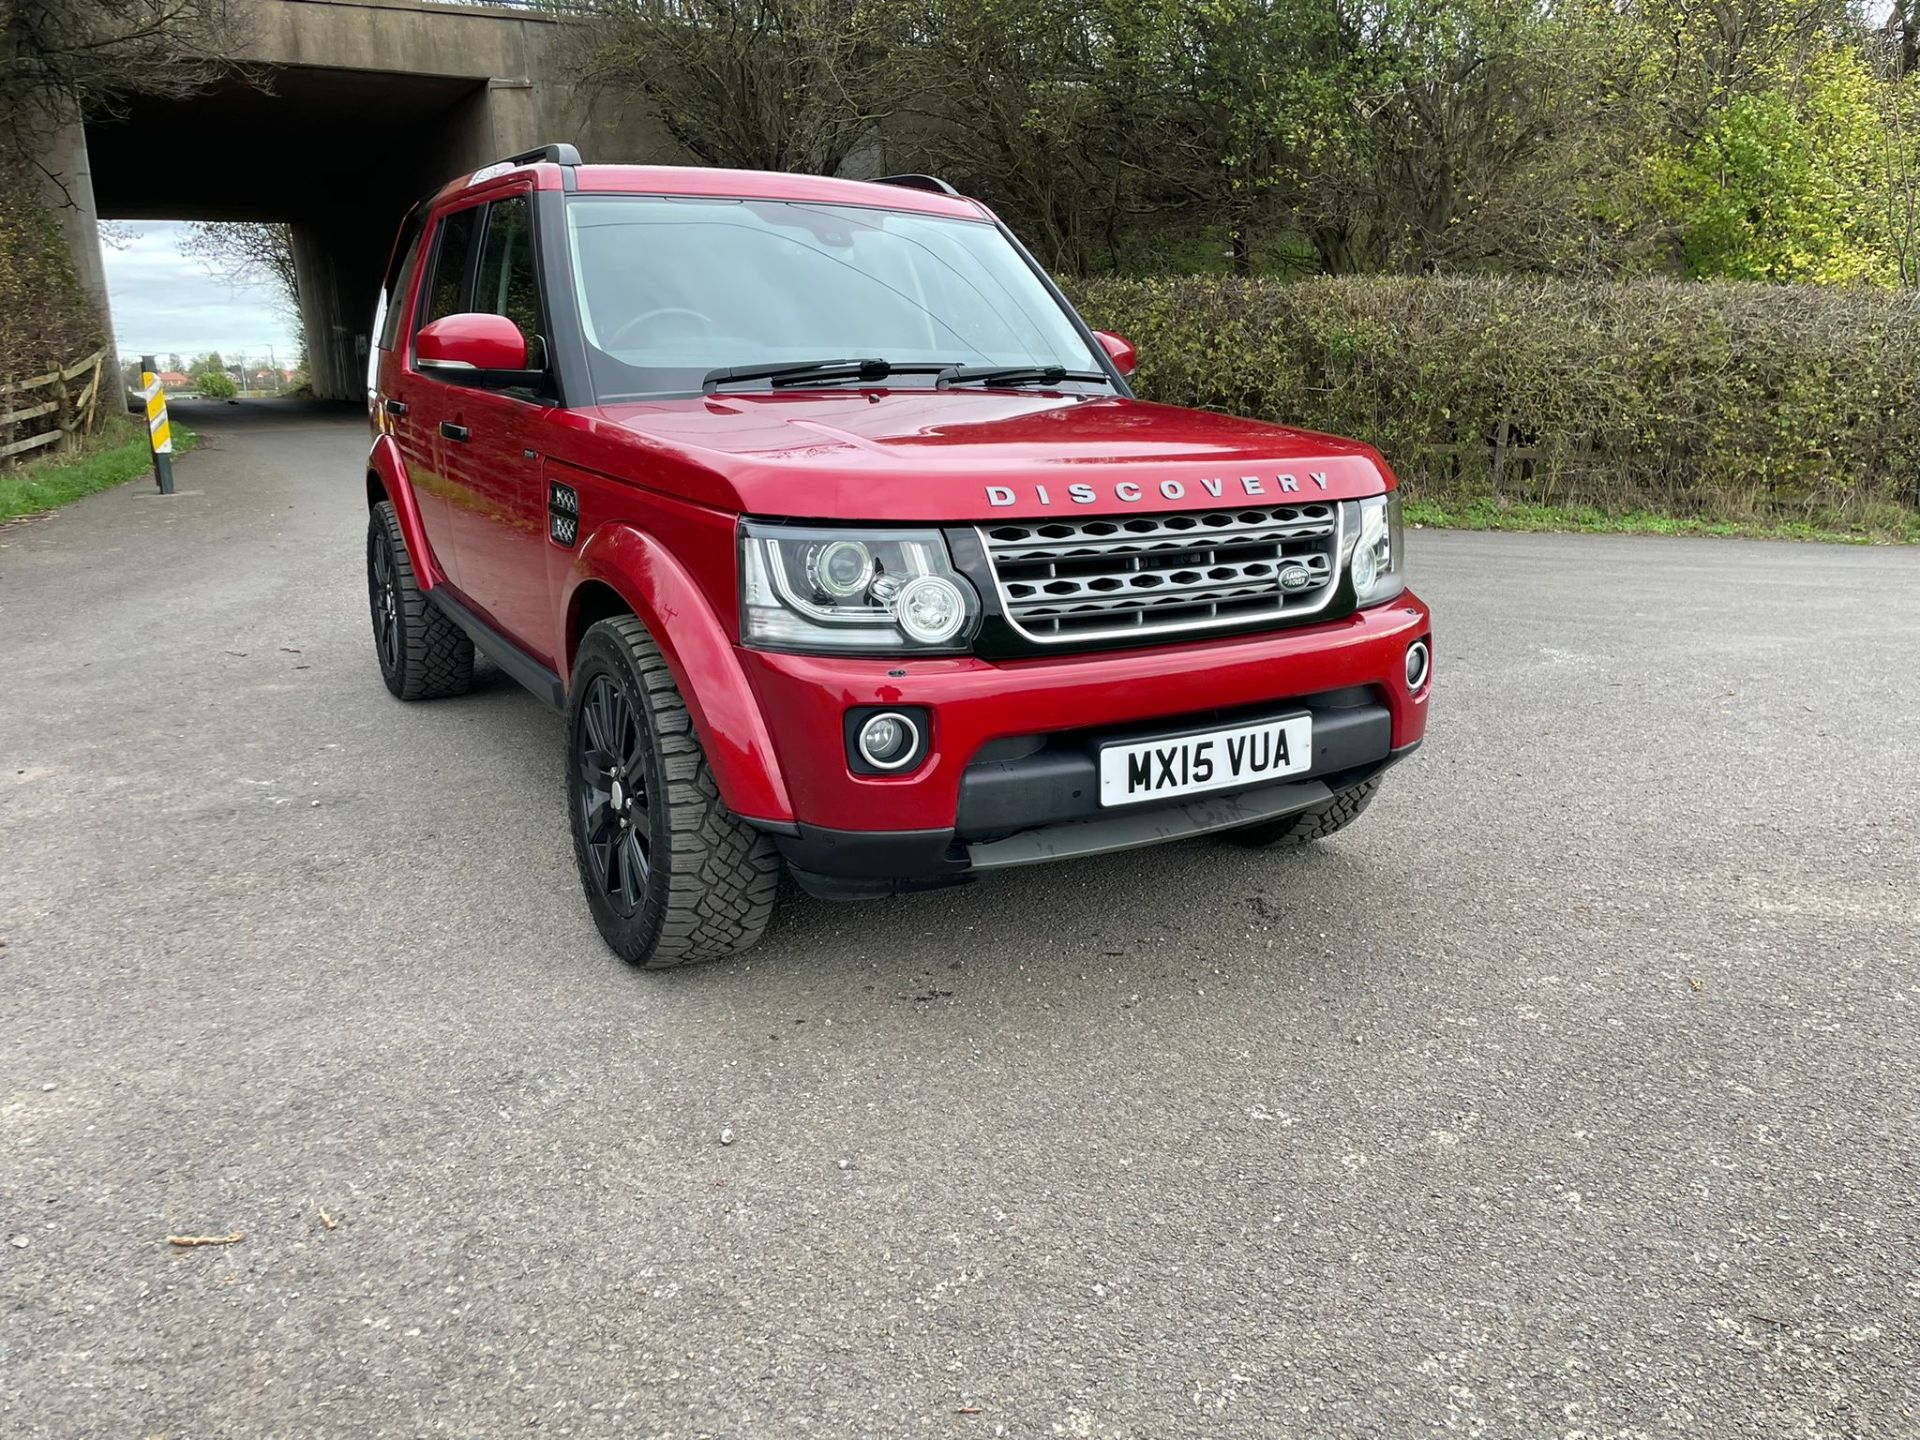 2015 LAND ROVER DISCOVERY XS SDV6 AUTO RED AUTOMATIC *PLUS VAT*